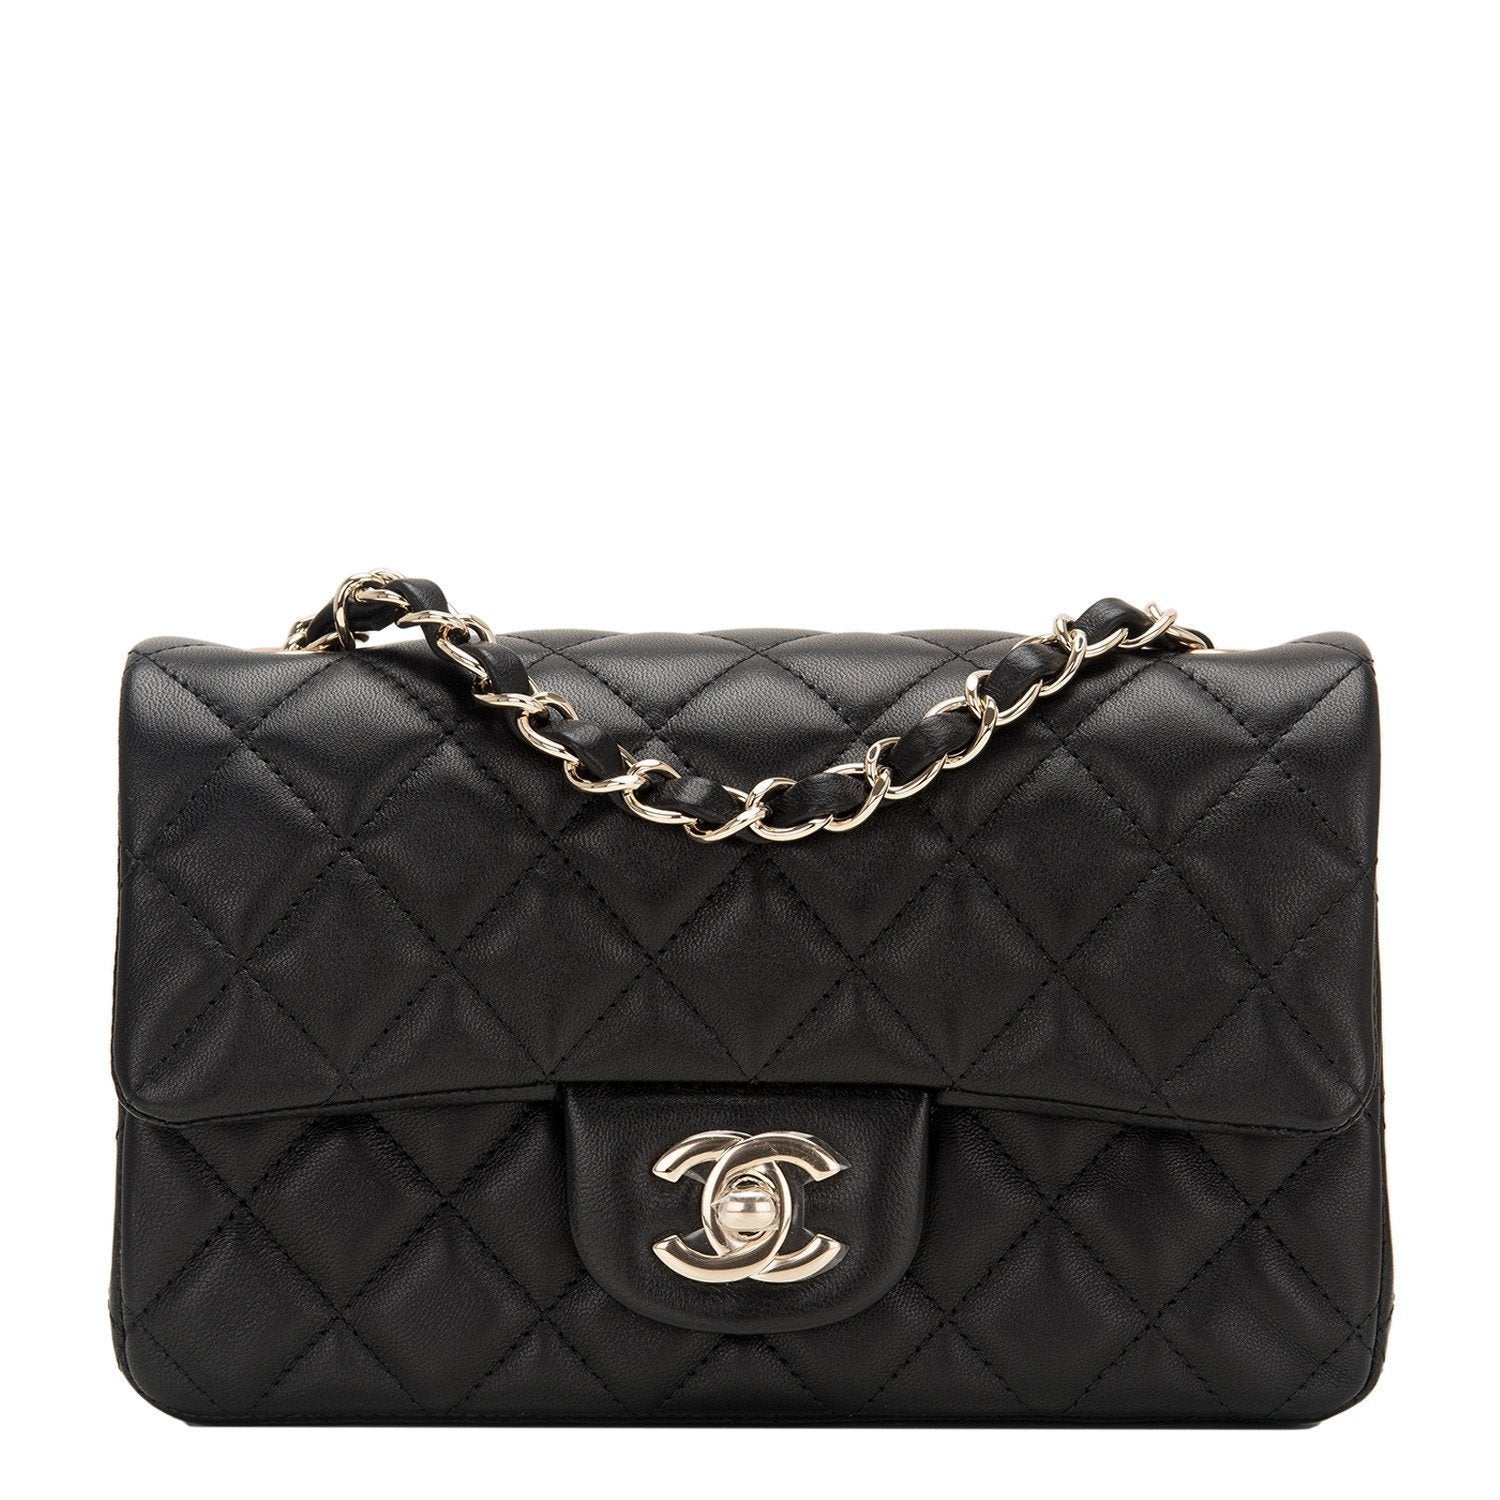 Shop The Chanel Handbag That Keeps On Going Up In Price